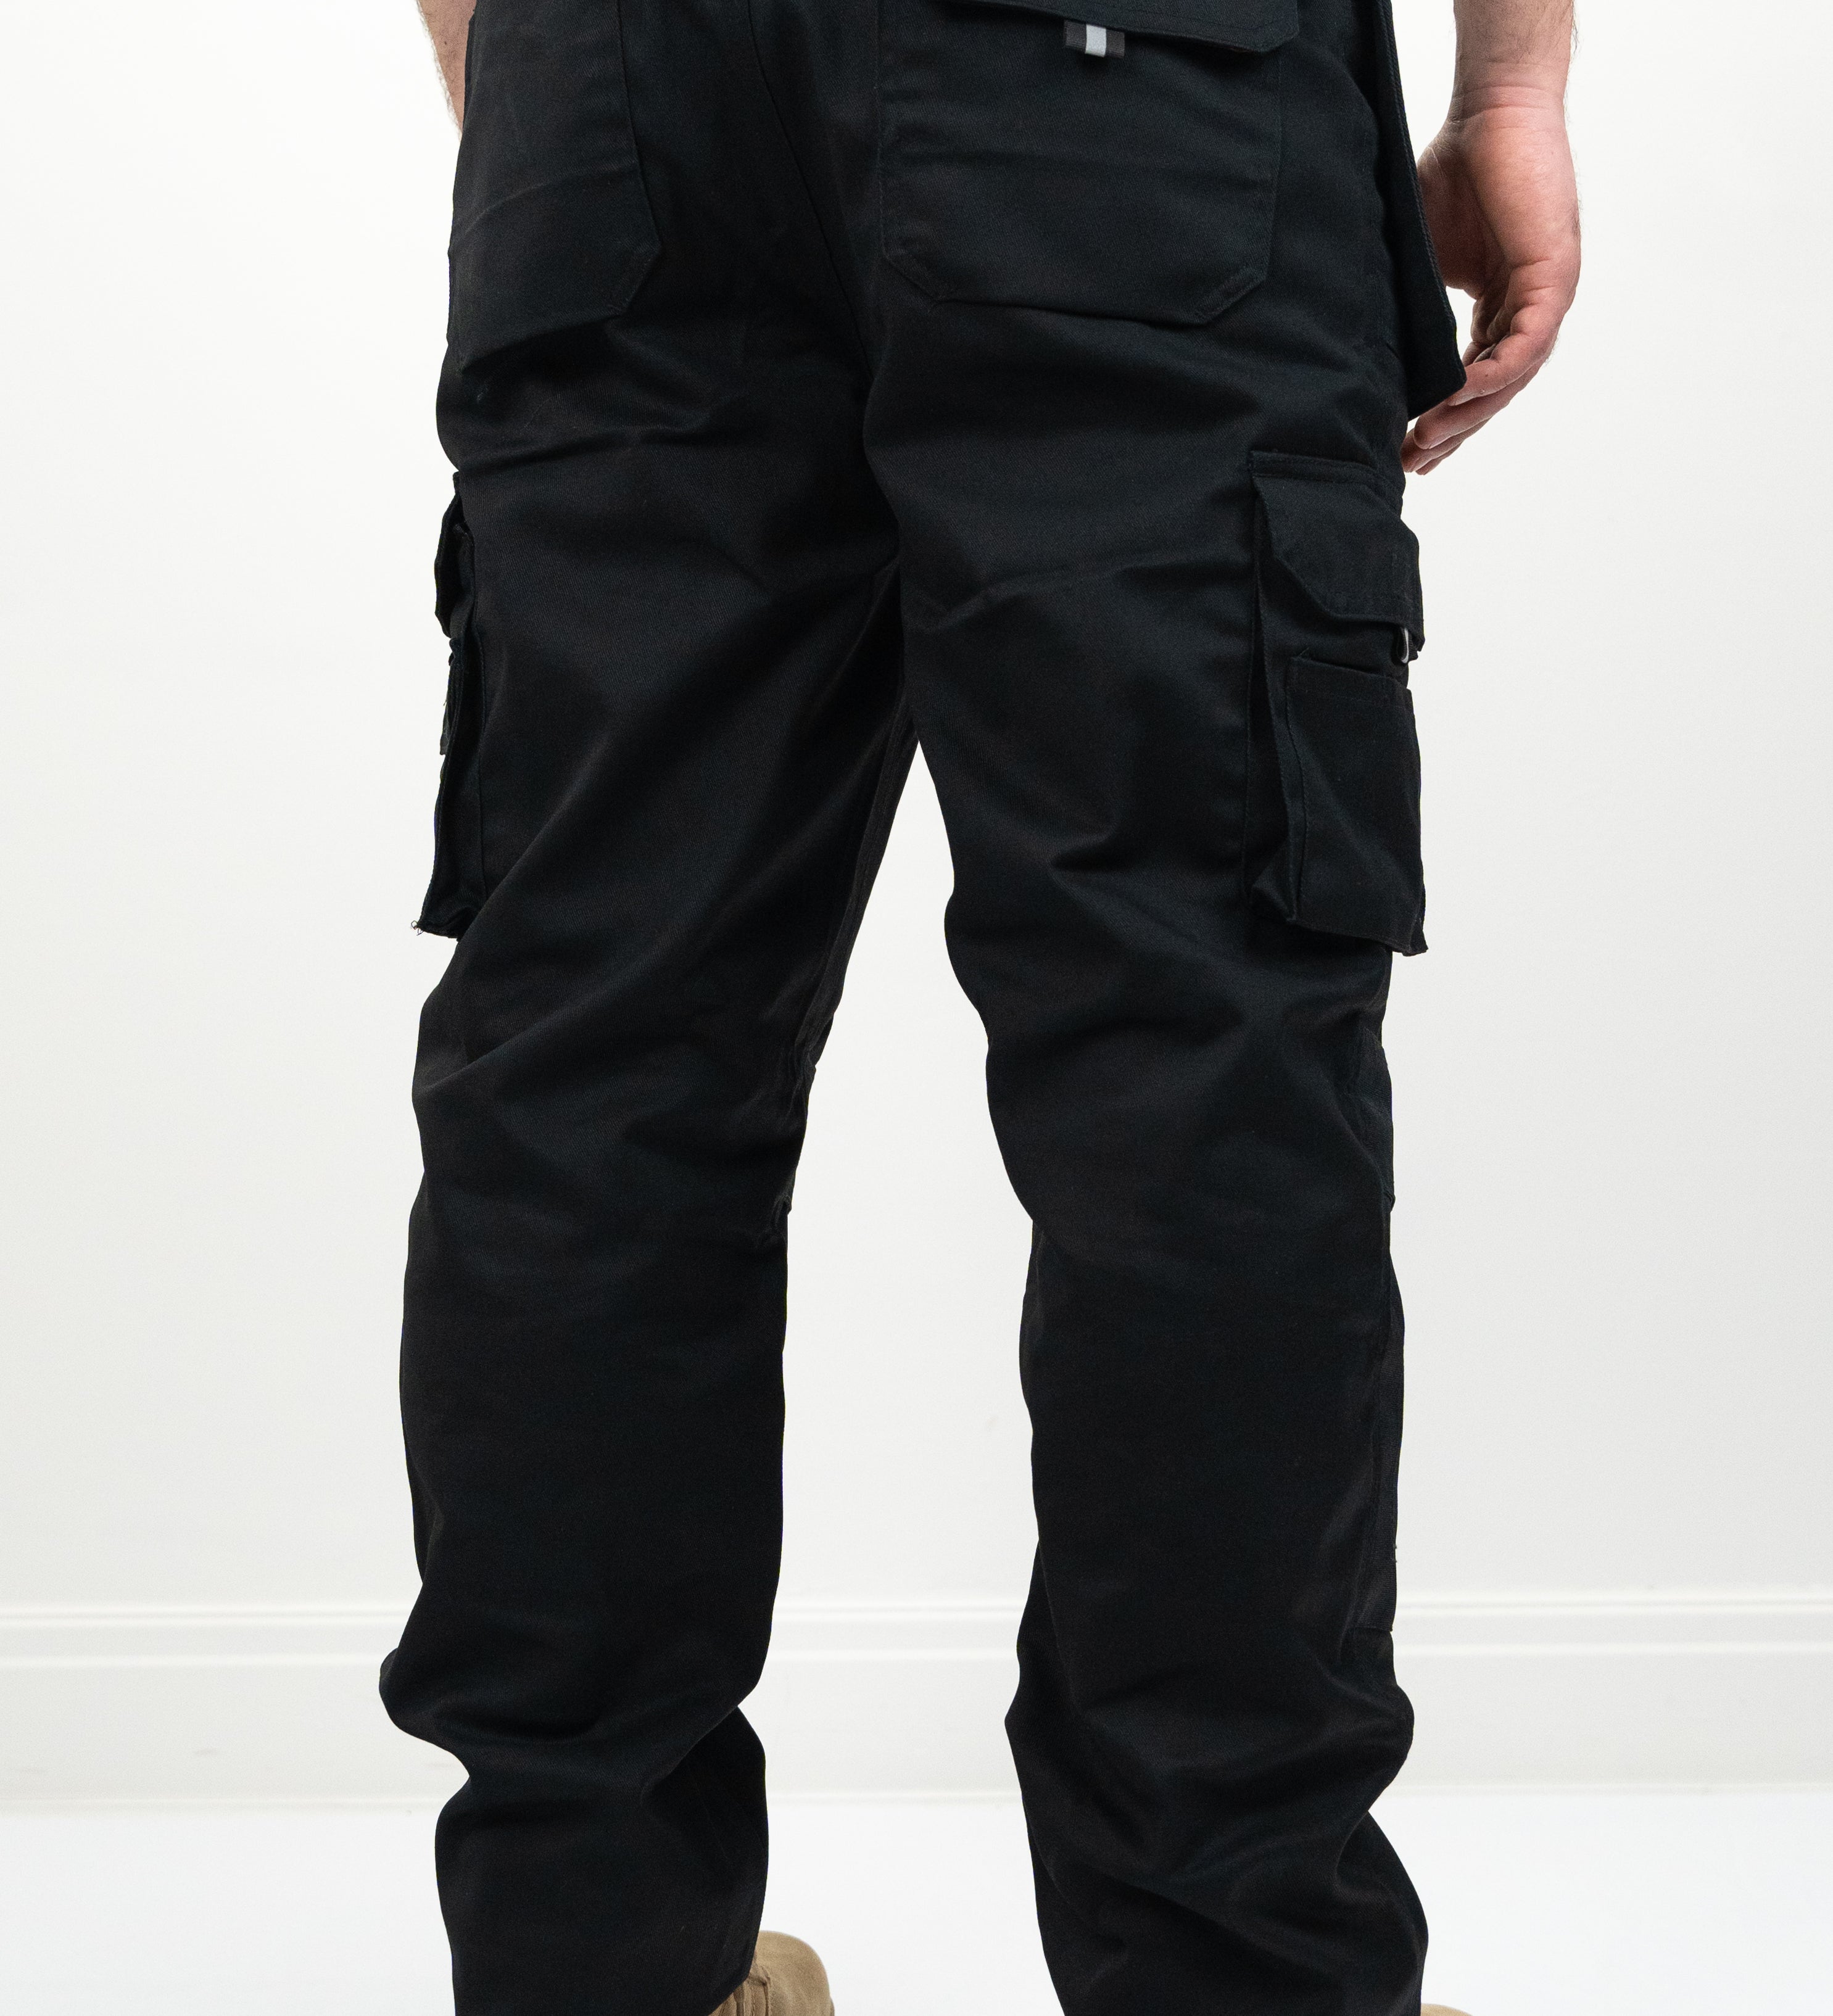 rear view of black work trousers with two rear pockets